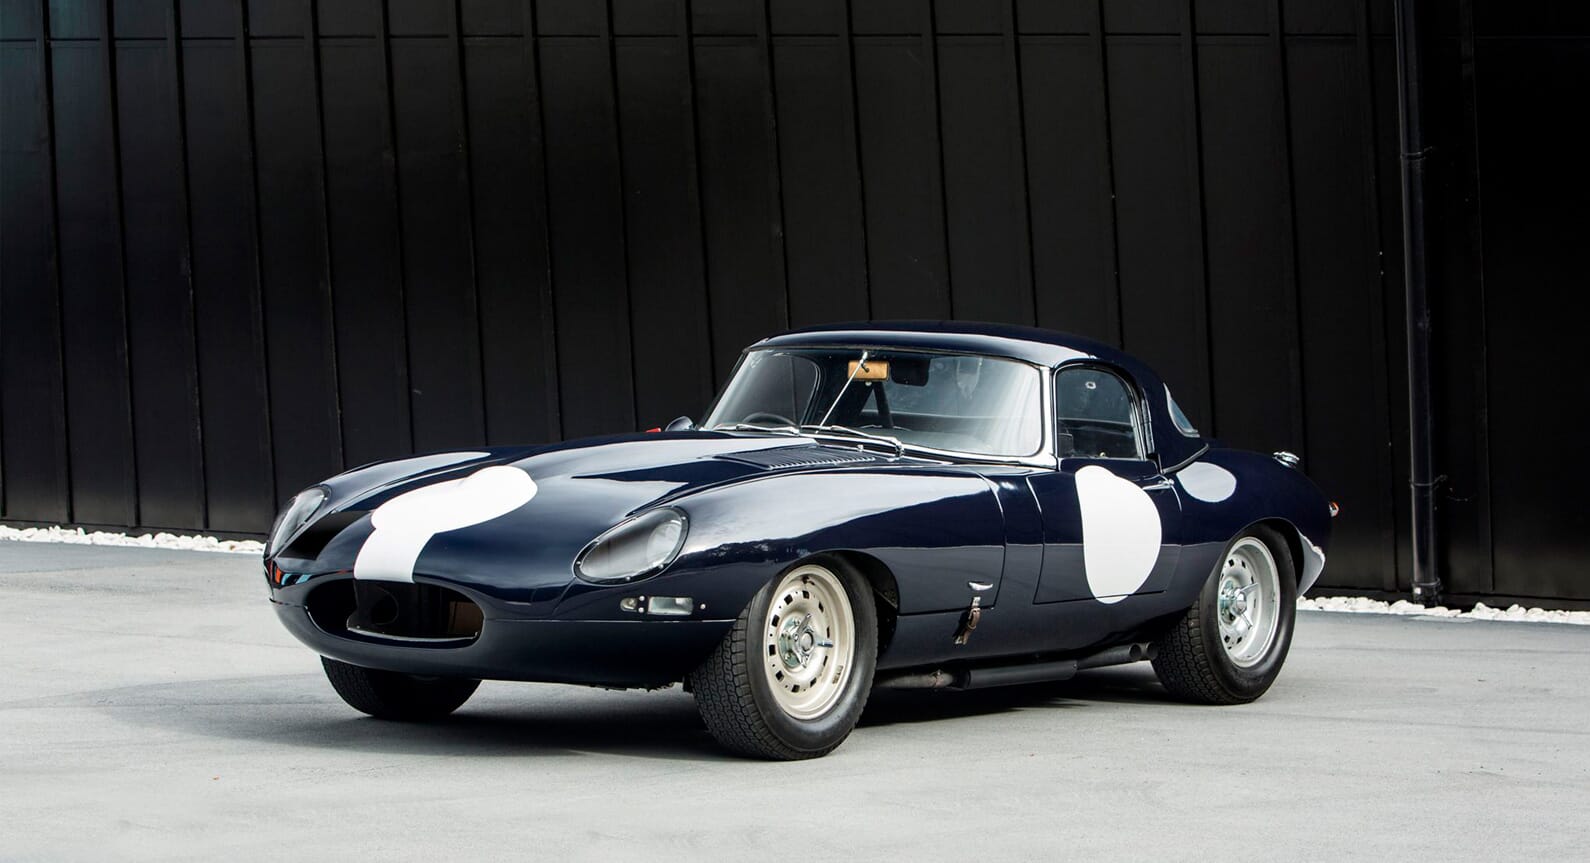 Why This 1965 Jaguar E-Type Might Break A World Record